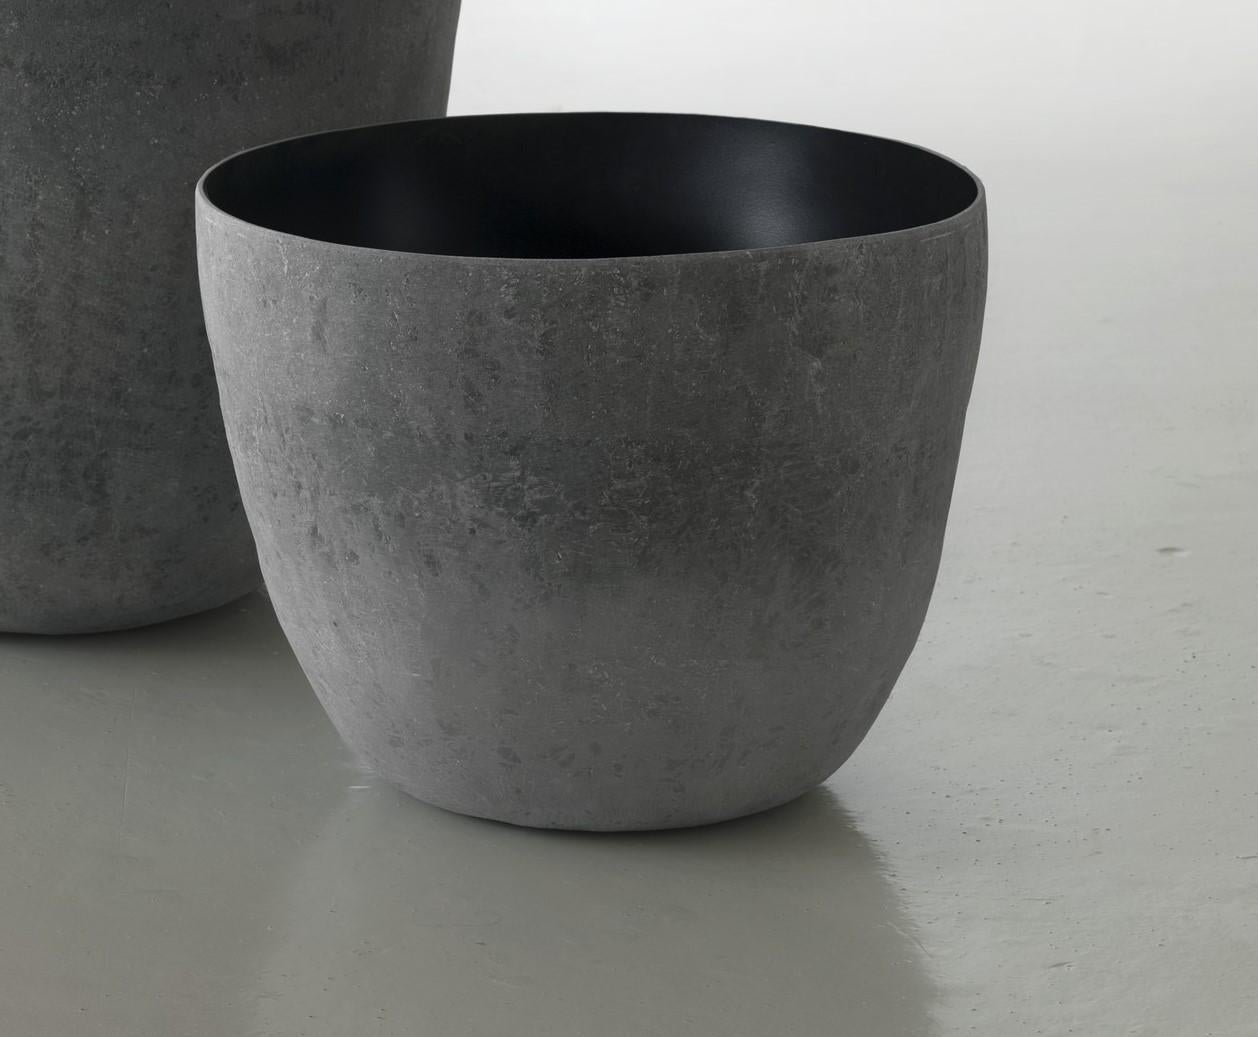 Vaso vase by Imperfettolab
Dimensions: Ø 37 x H 29 cm
Materials: Raw material


Imperfetto Lab
Who we are? We are a family.
Verter Turroni, Emanuela Ravelli and our children Elia, Margherita and Eusebio.
All together, we are separate parts